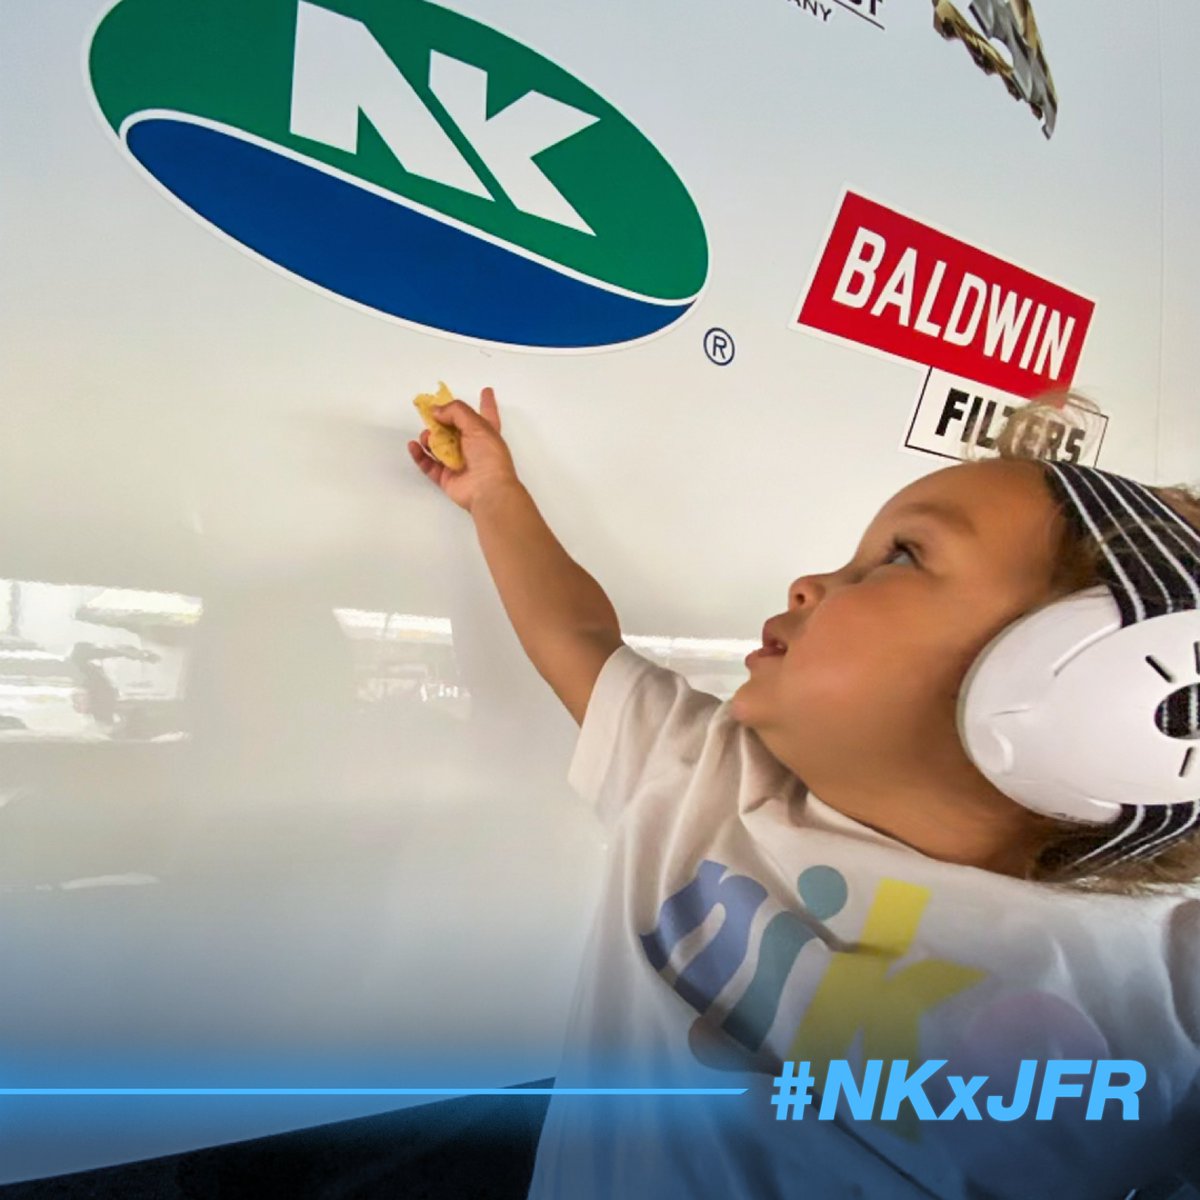 What a weekend! Our team had a blast cheering on @JFR_Racing  🎉We can't wait to see you back on the track in 1 month at #NorwalkNats (But who's counting 😉) #NKxJFR